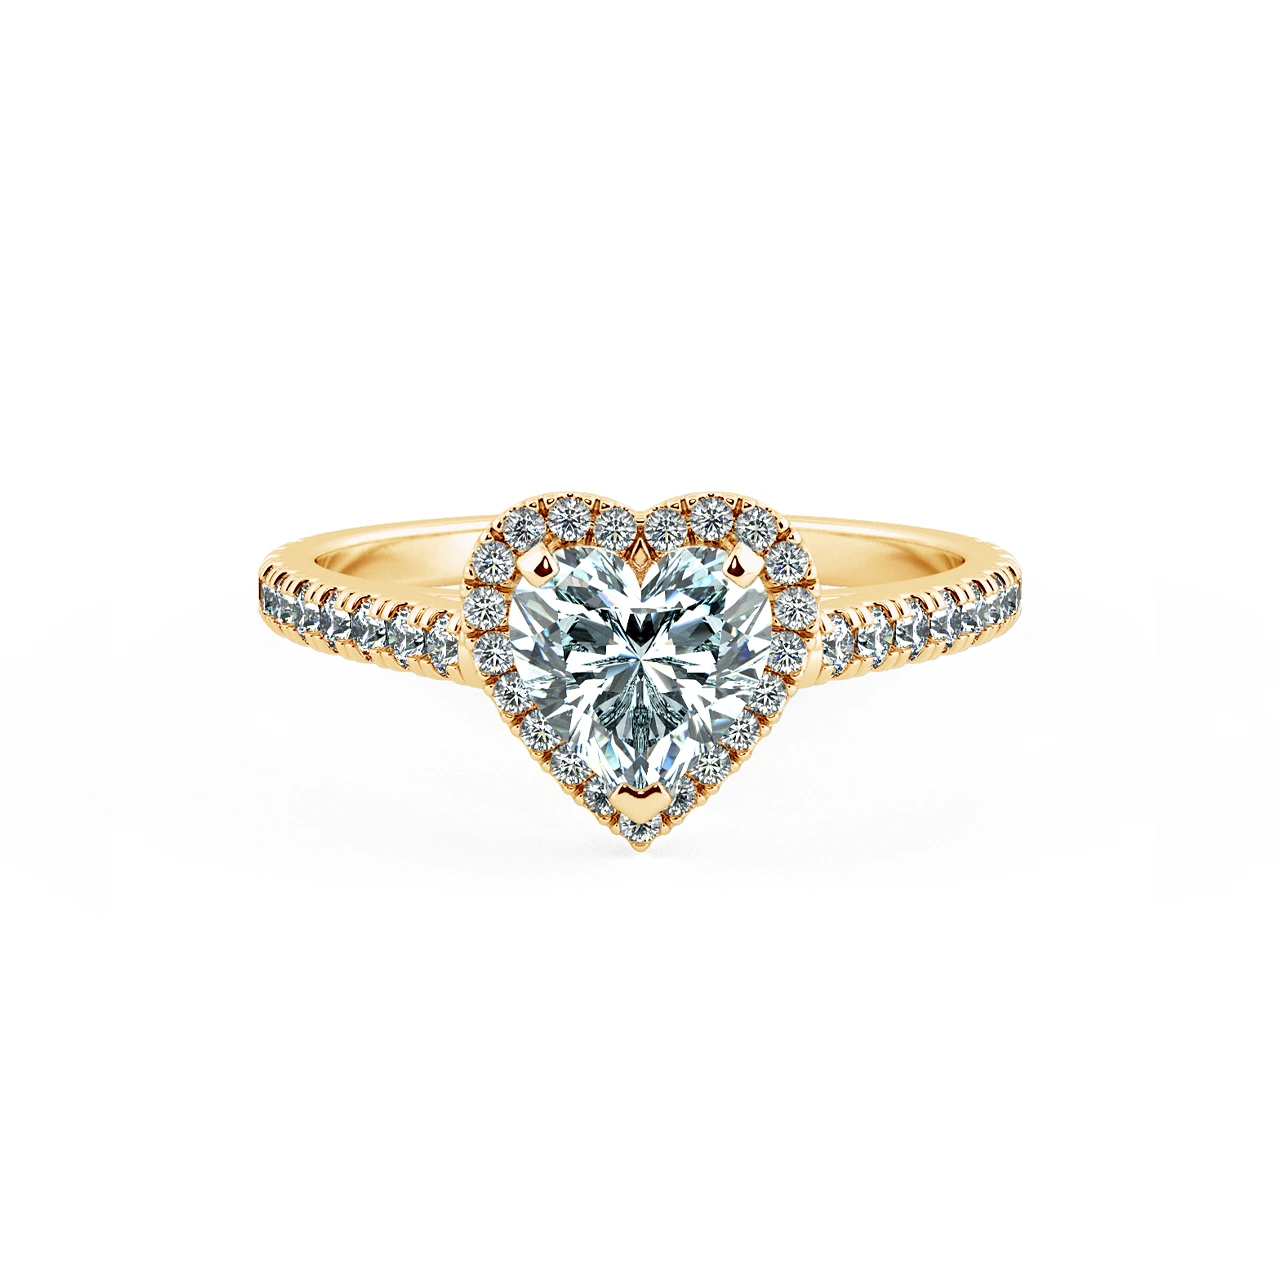 Halo Engagement Ring with Eternity Band NCH8402 1